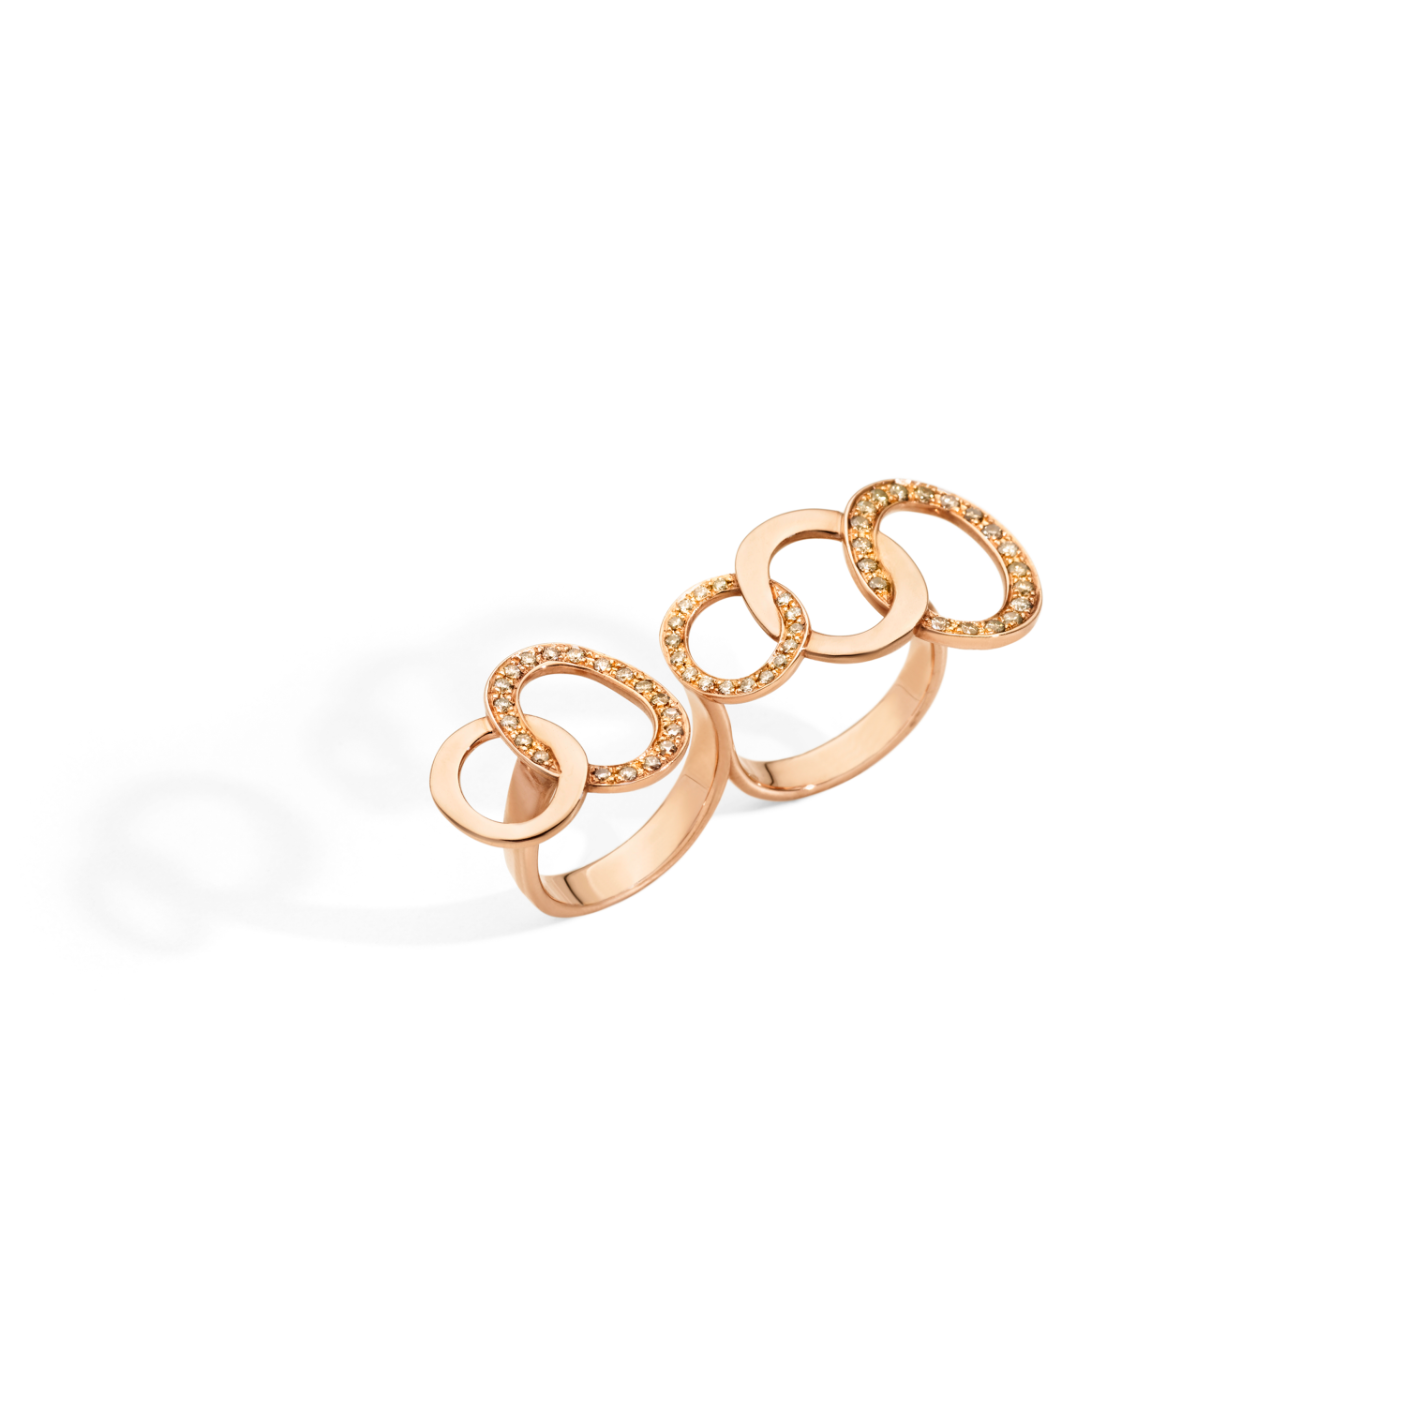 PAC0070_O7000_DBR00_010_Pomellato_brera-ring-between-two-fingers-rose-gold-18kt-brown-diamond.png